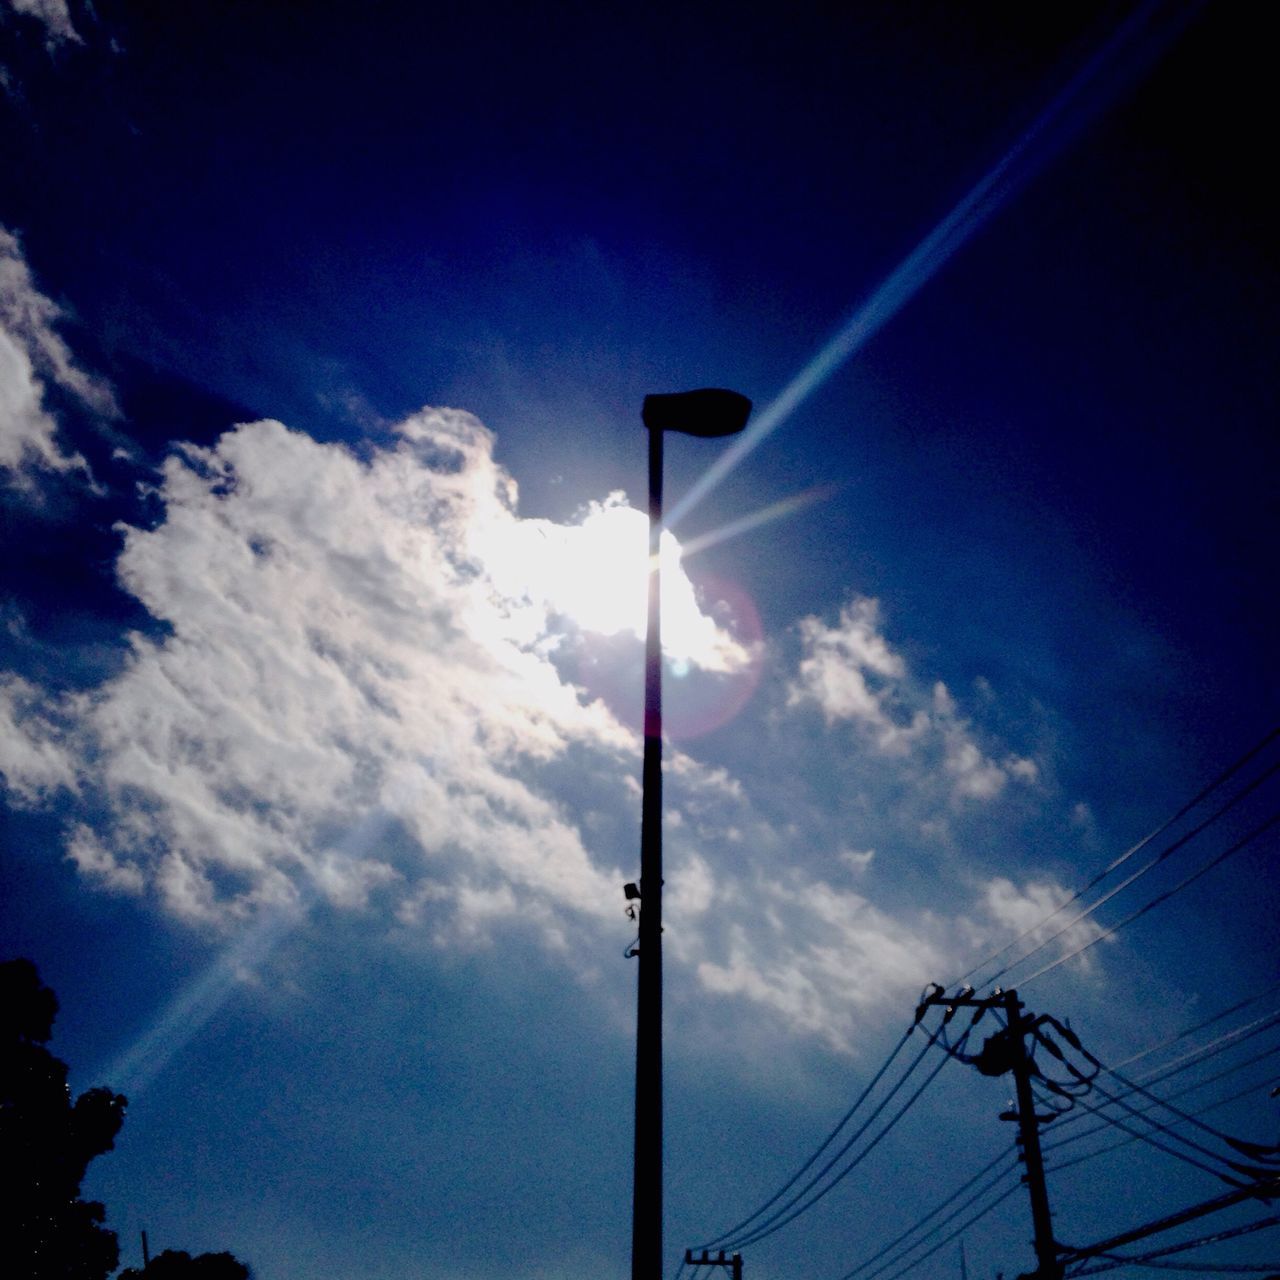 low angle view, electricity, sky, power line, street light, electricity pylon, lighting equipment, power supply, blue, connection, silhouette, cable, sun, cloud - sky, fuel and power generation, technology, pole, sunlight, sunbeam, cloud